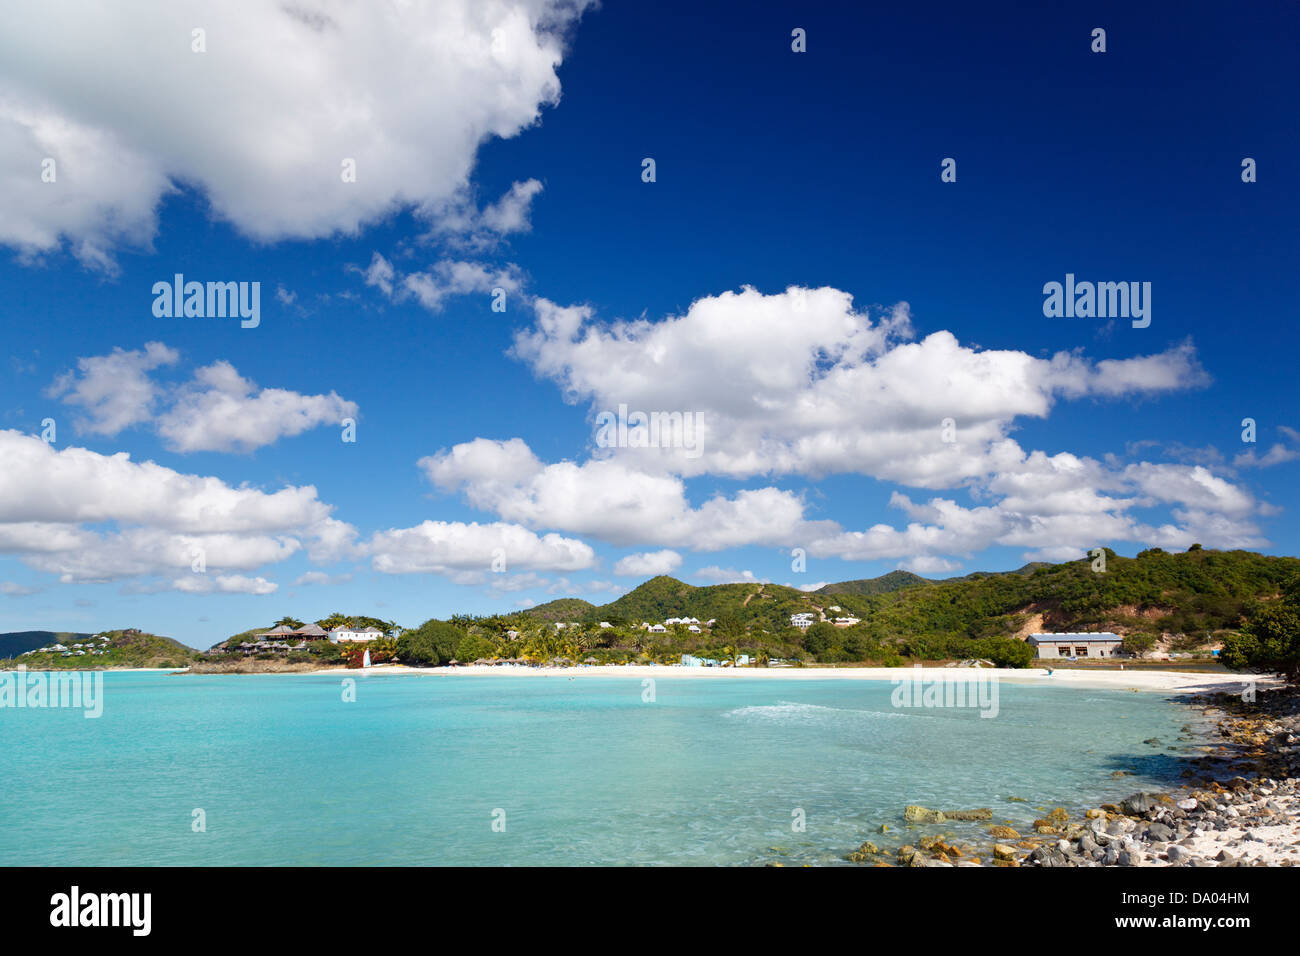 Perfect white caribbean beach with palm trees and turquoise sea. Cocobay Beach, Antigua. Stock Photo